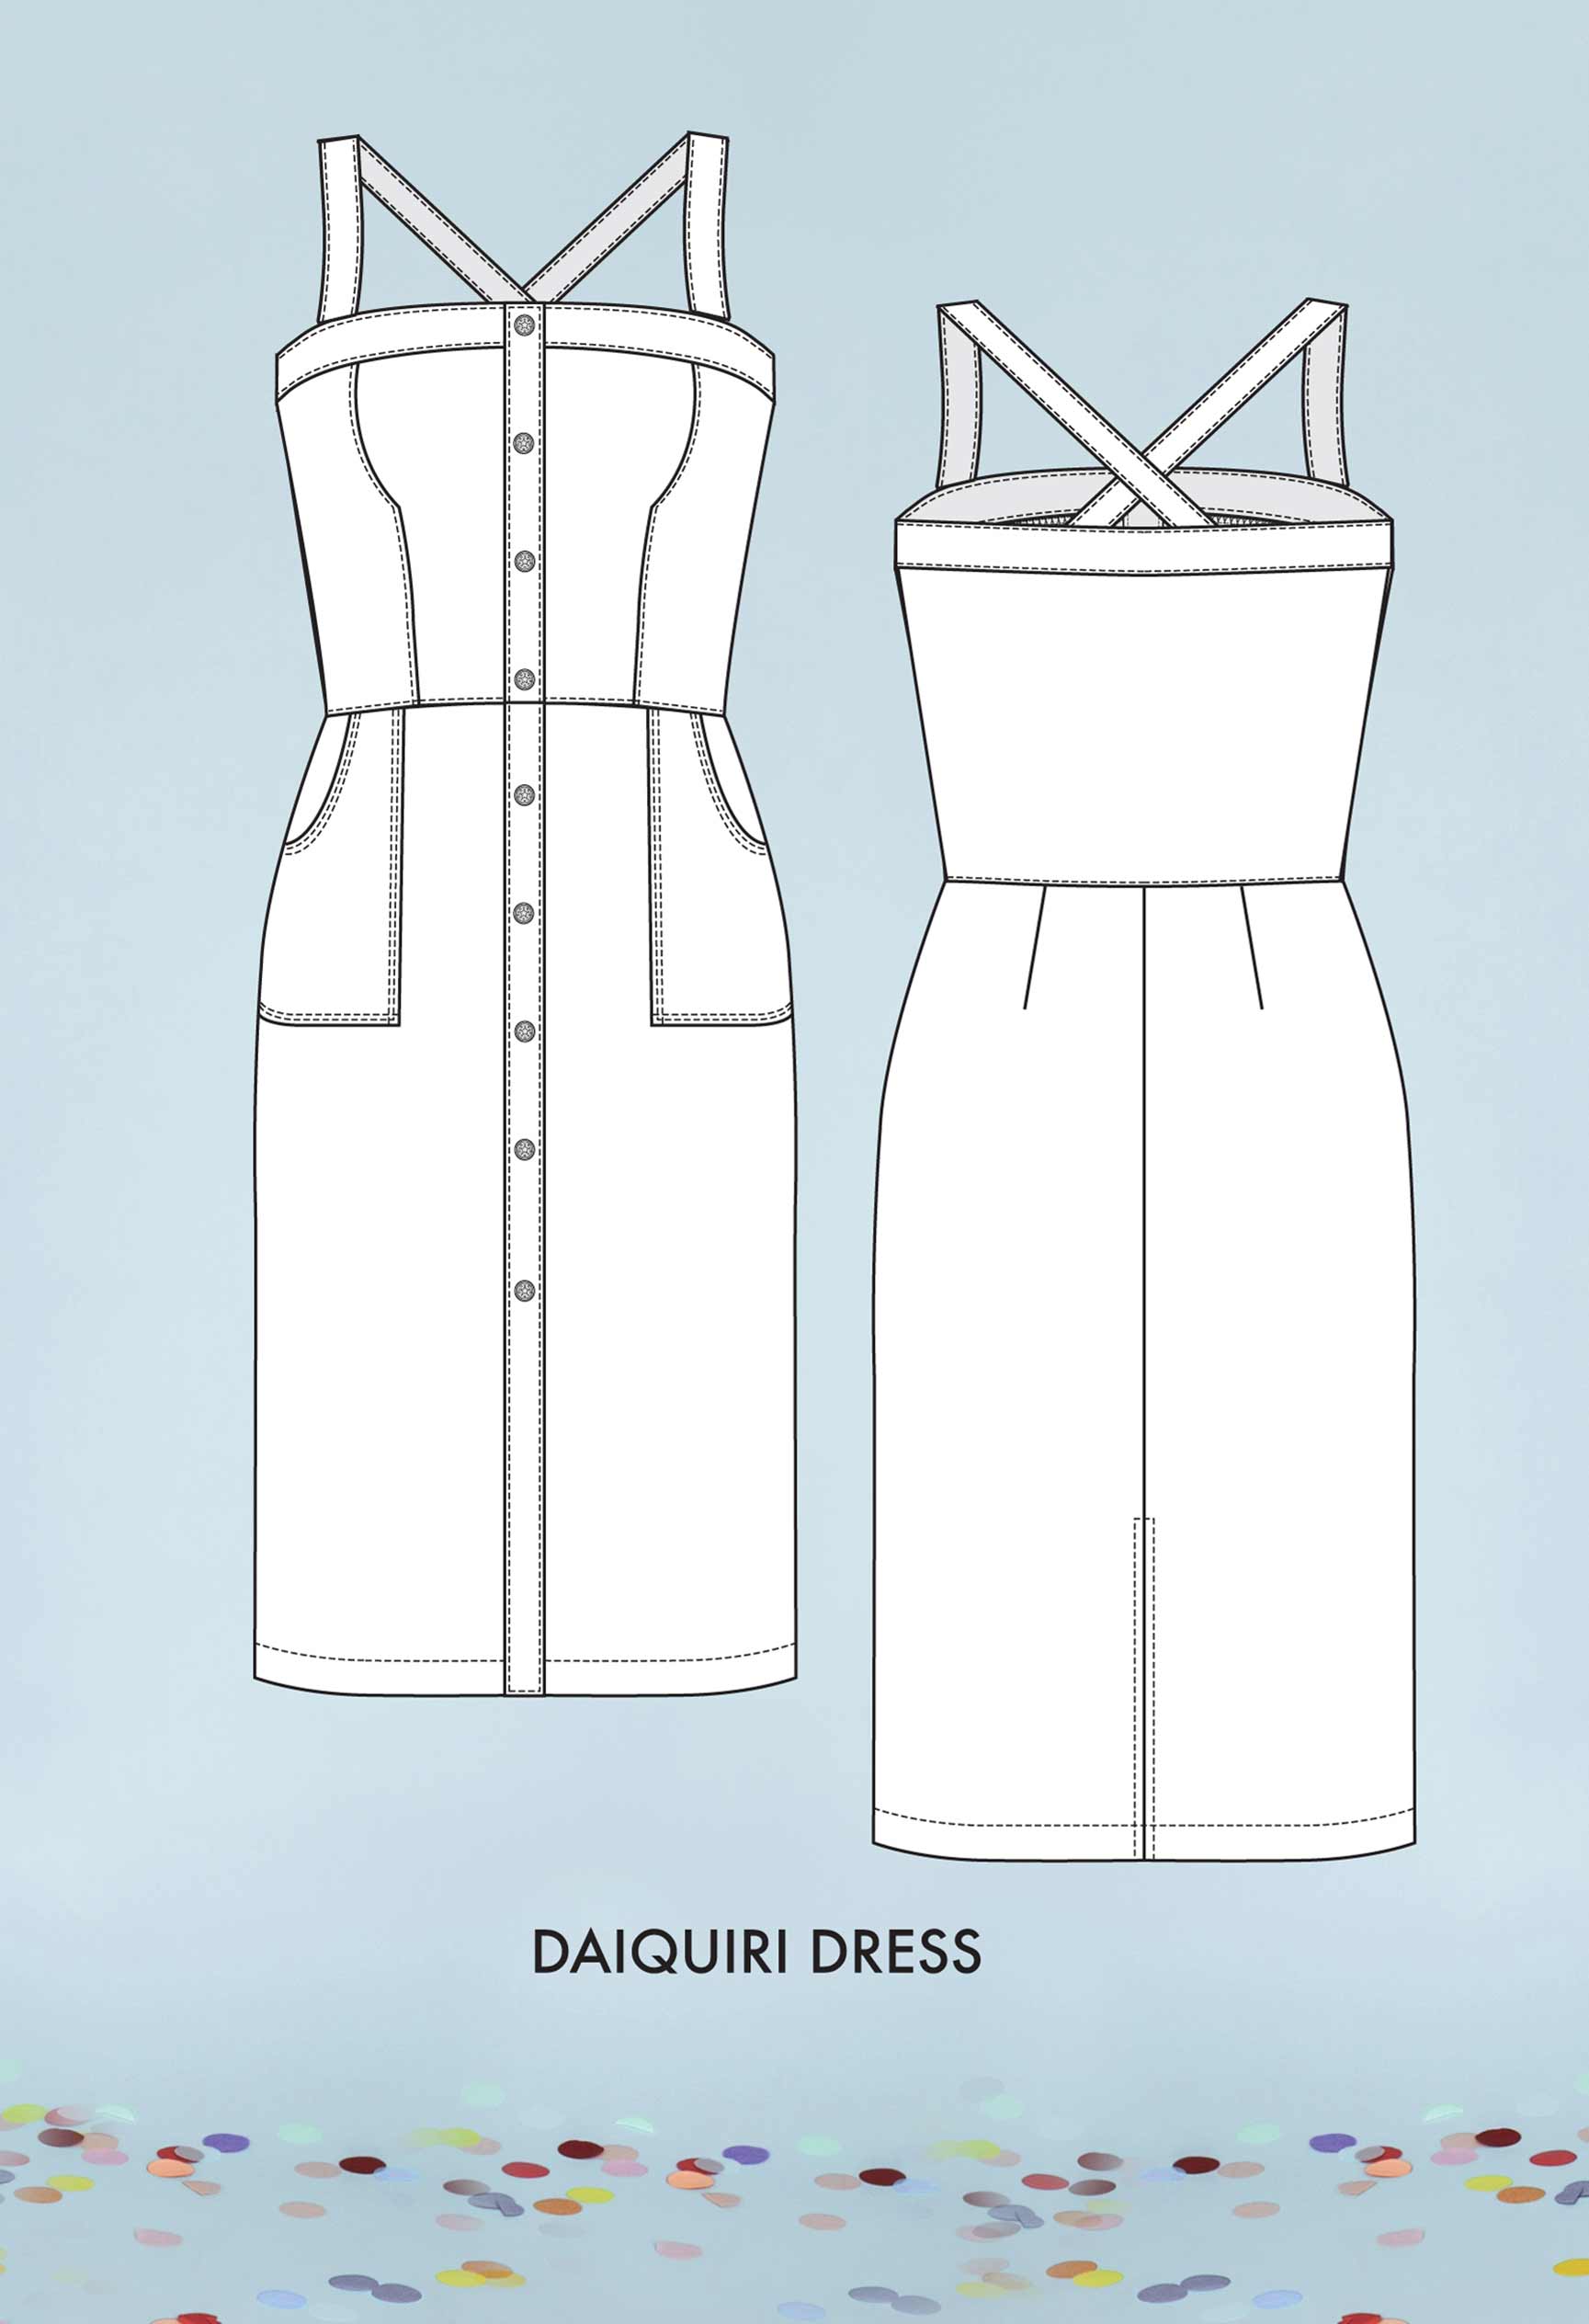 Our Lady of Leisure Daiquiri Dress